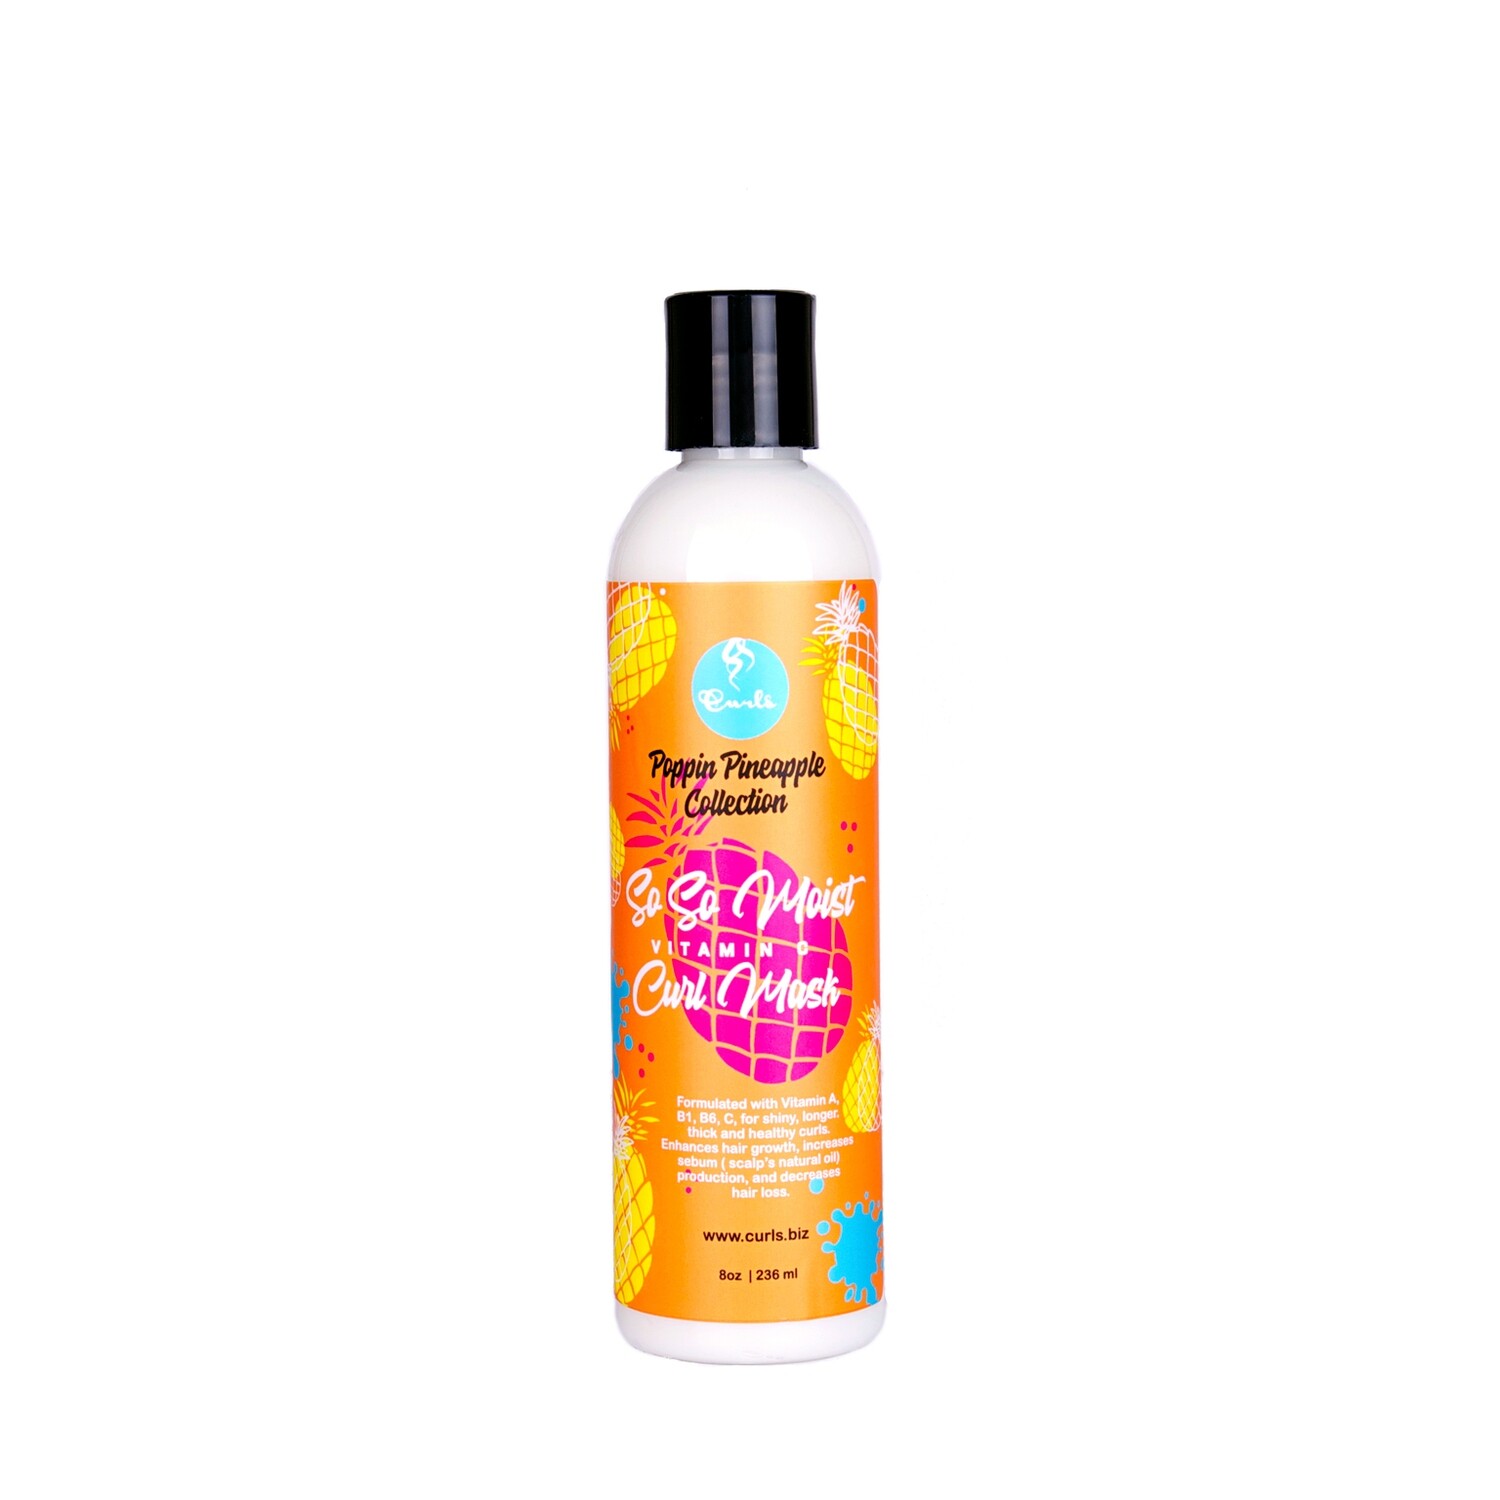 CURLS POPPIN PINEAPPLE COLLECTION SO SO MOIST VITAMIN C CURL MASK 8oz